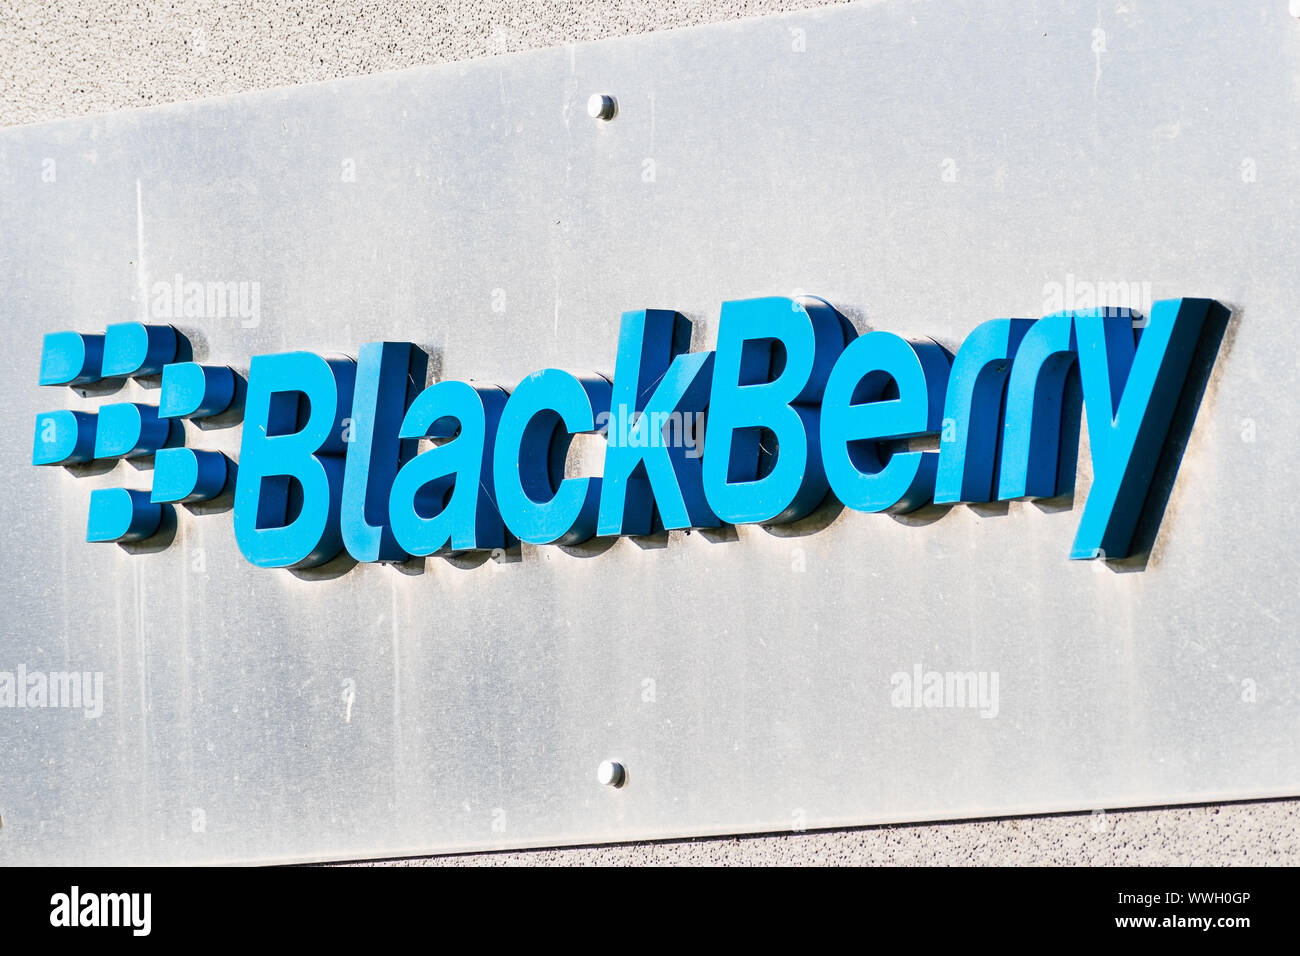 Sep 14, 2019 Mountain View / CA / USA - Blackberry logo at their HQ  in Silicon Valley; BlackBerry Ltd (former developer of the BlackBerry smartphones Stock Photo